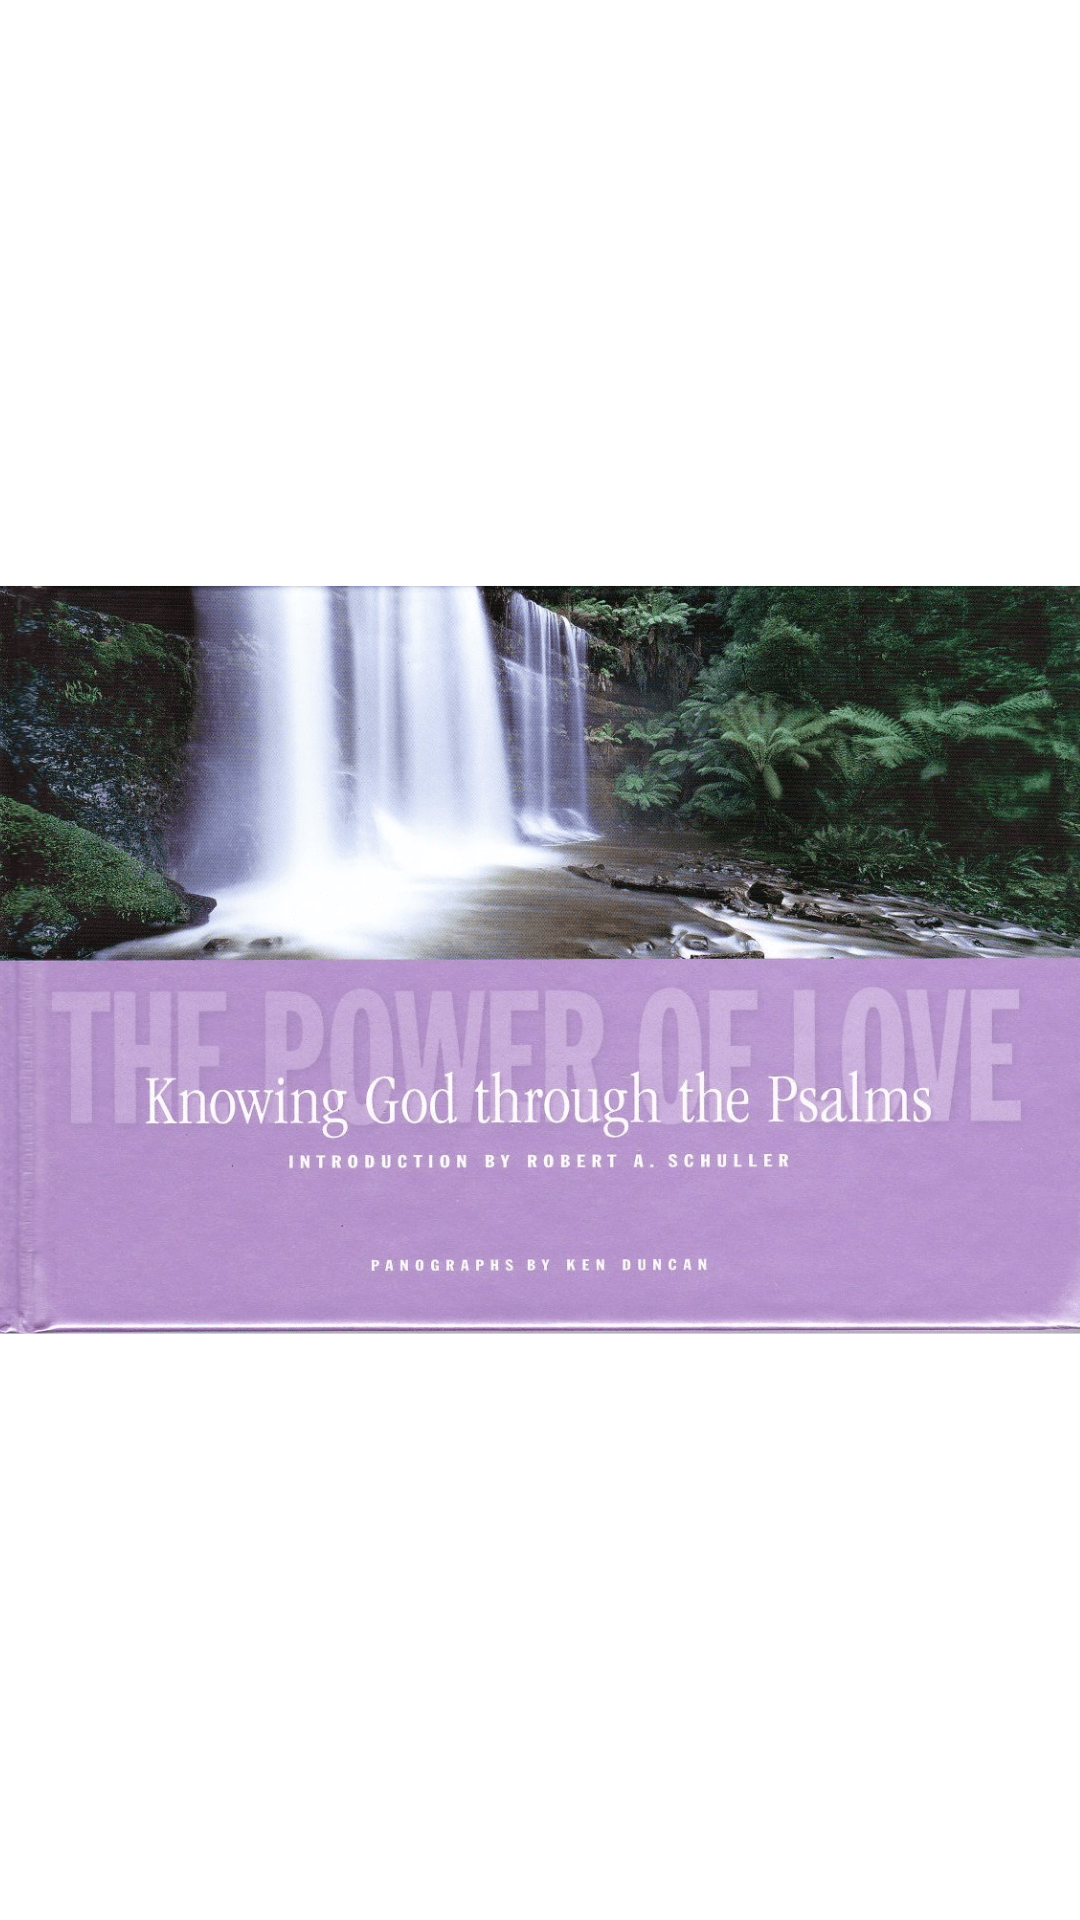 The Power of Love: Knowing God through the Psalms